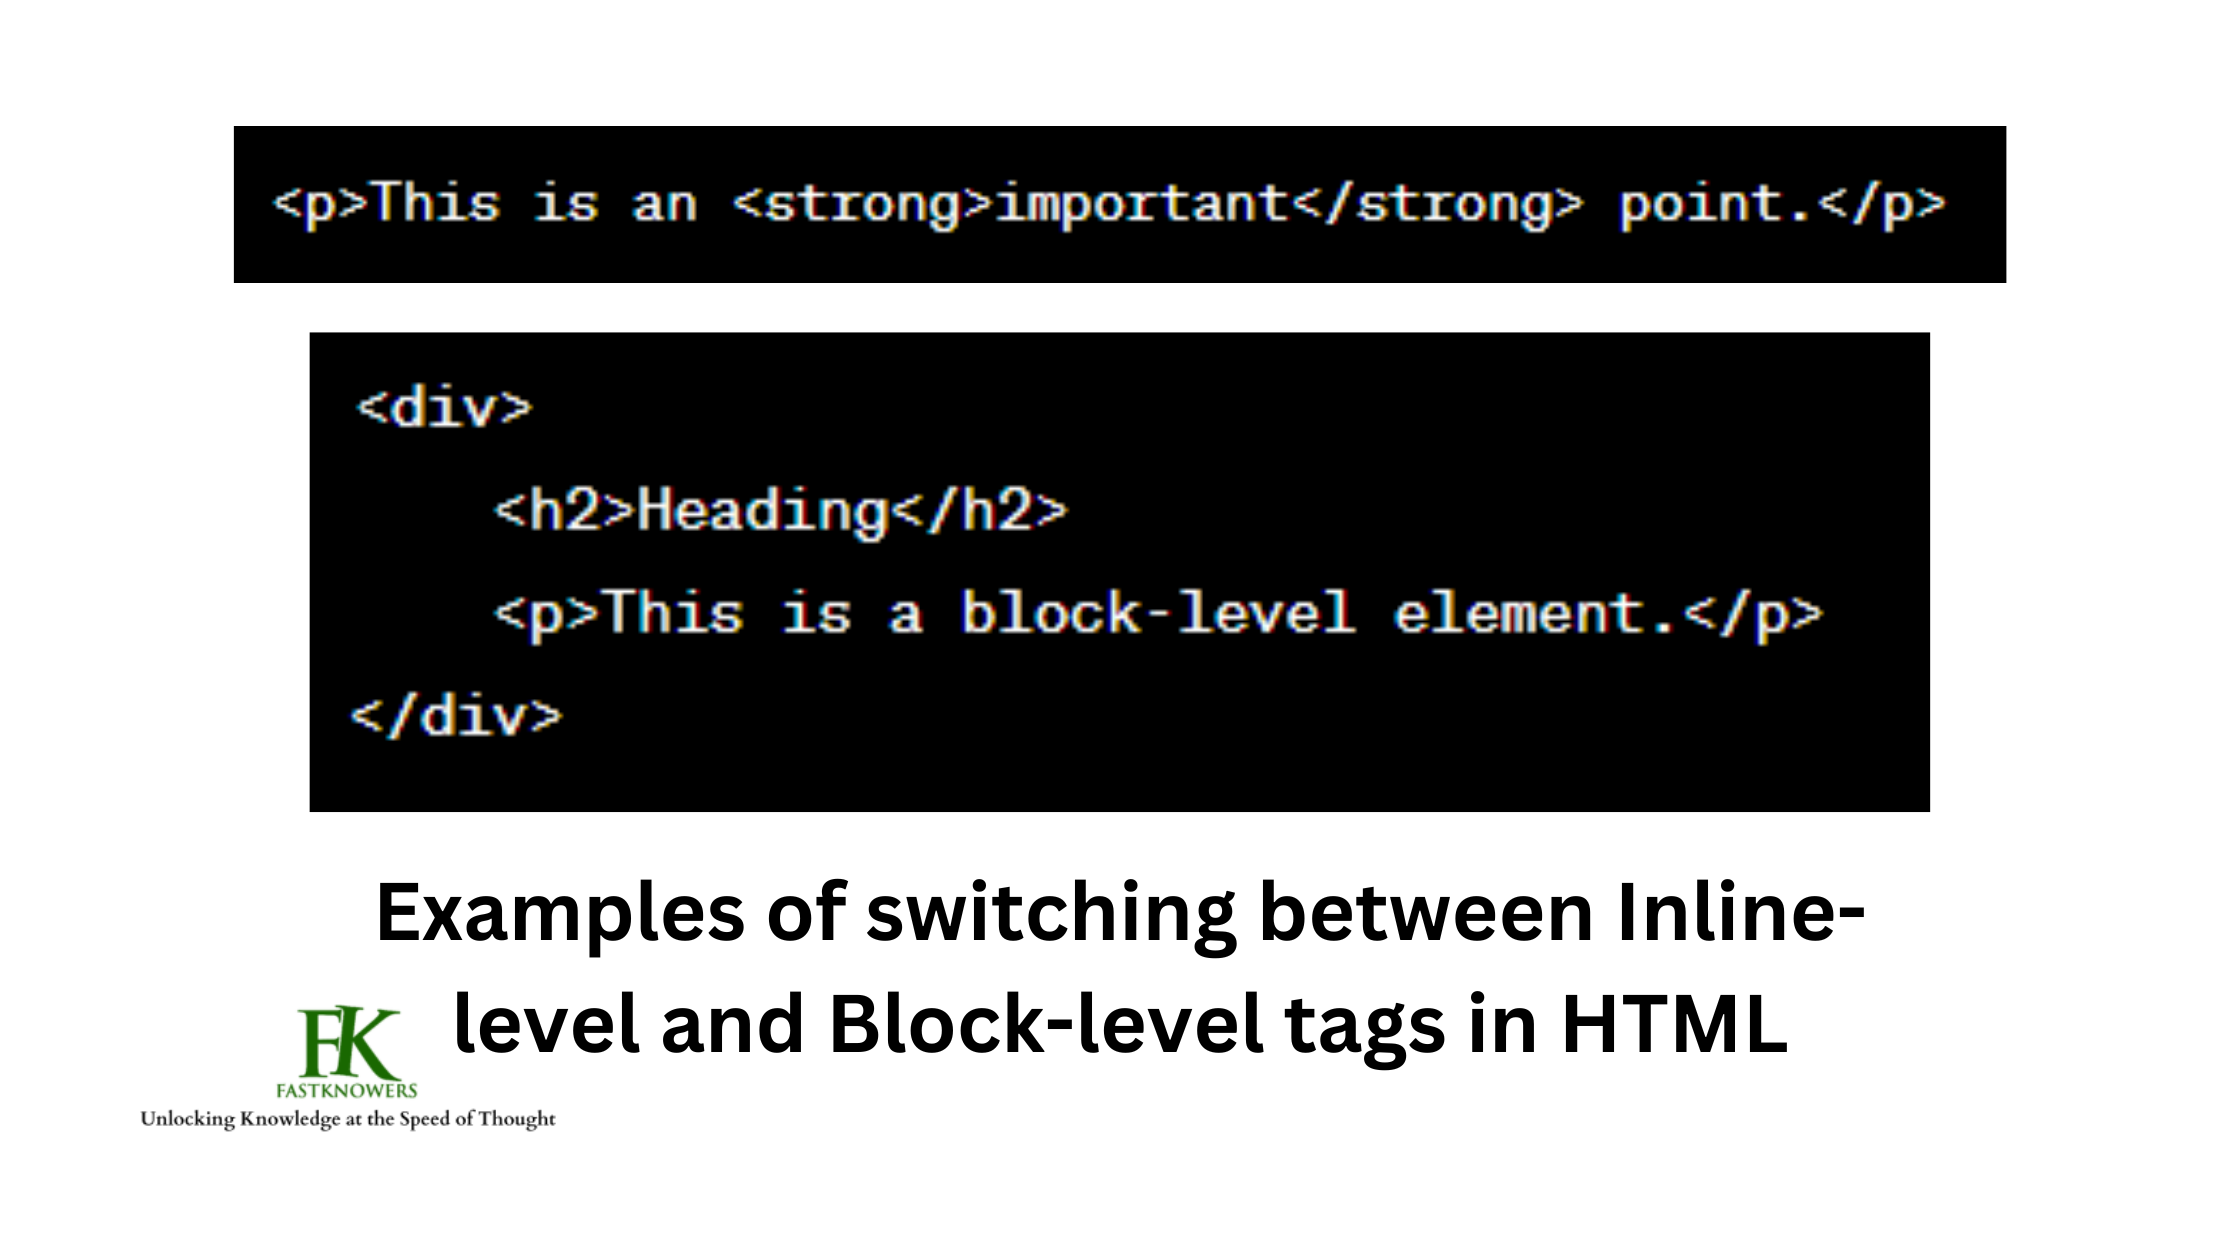 switching between Inline-level and Block-level tags in HTML

